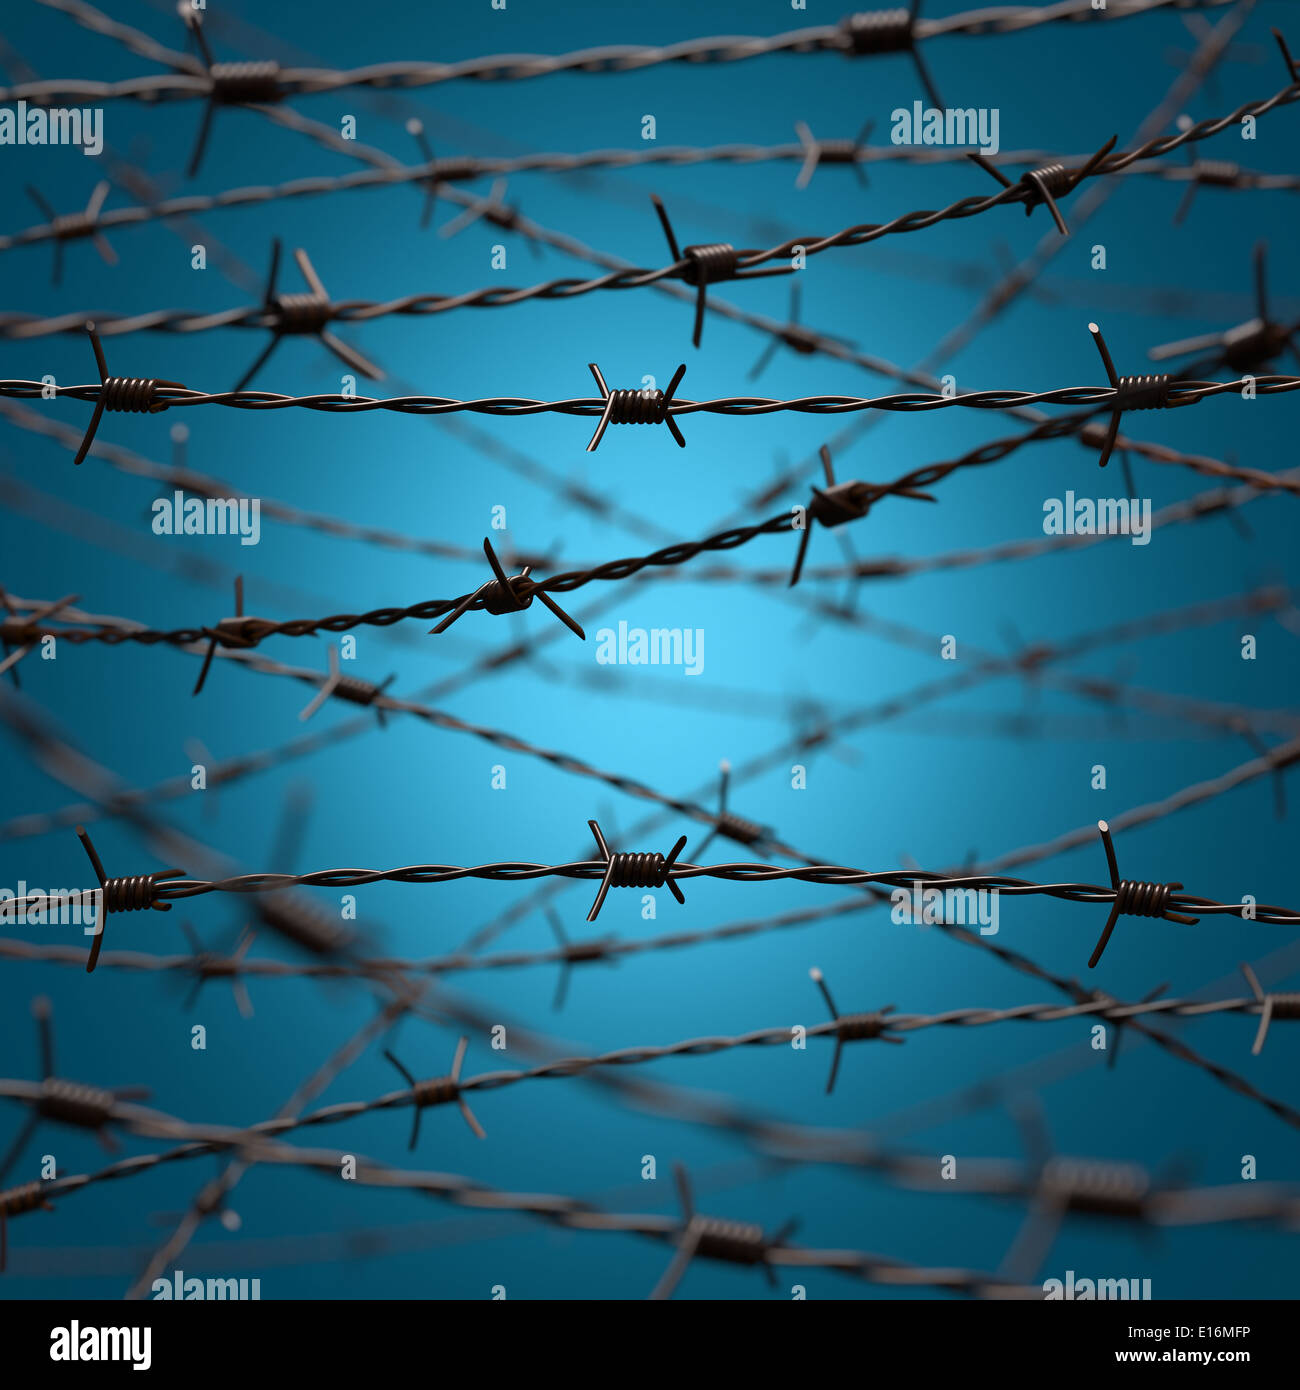 Tangle of barbed wire on a background blue degrade. Stock Photo